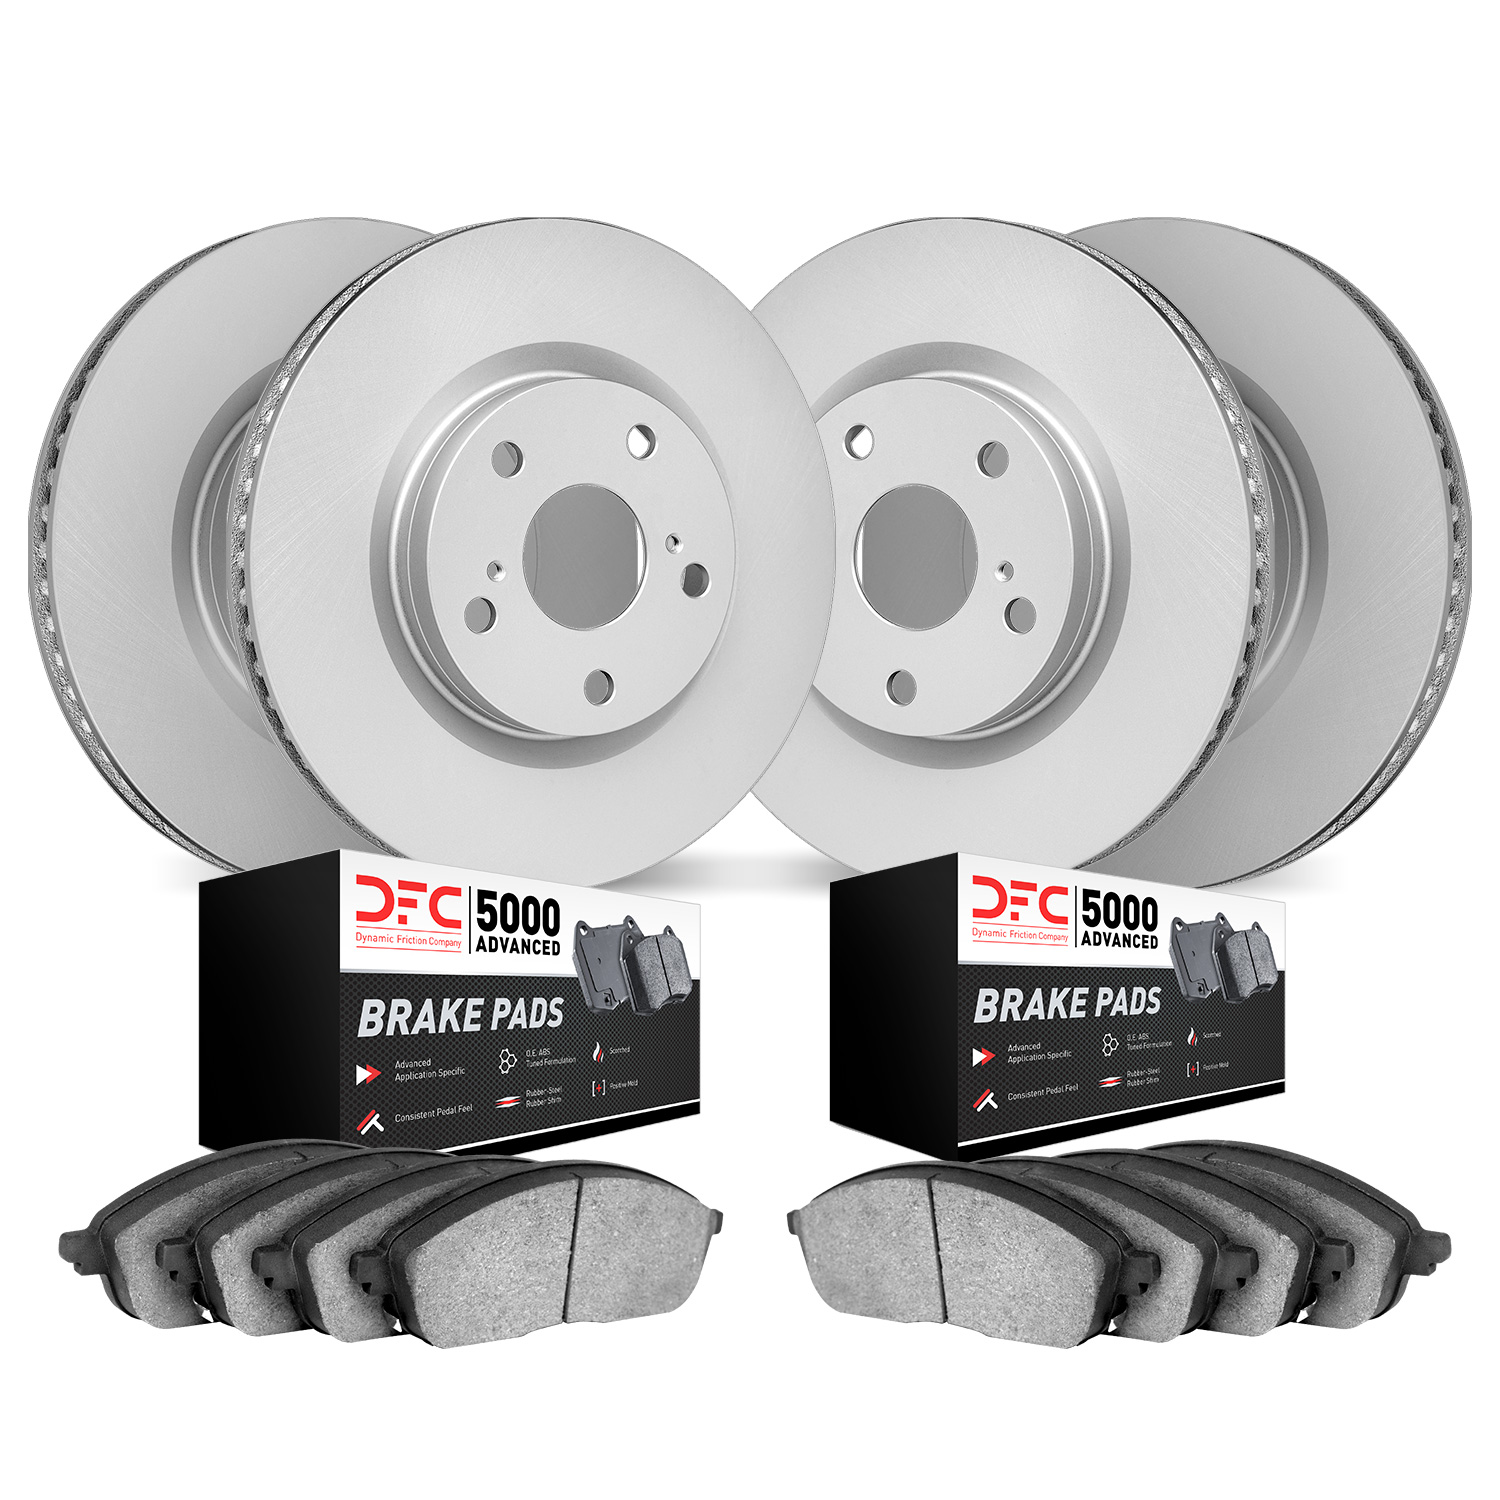 4504-11015 Geospec Brake Rotors w/5000 Advanced Brake Pads Kit, 2014-2017 Land Rover, Position: Front and Rear